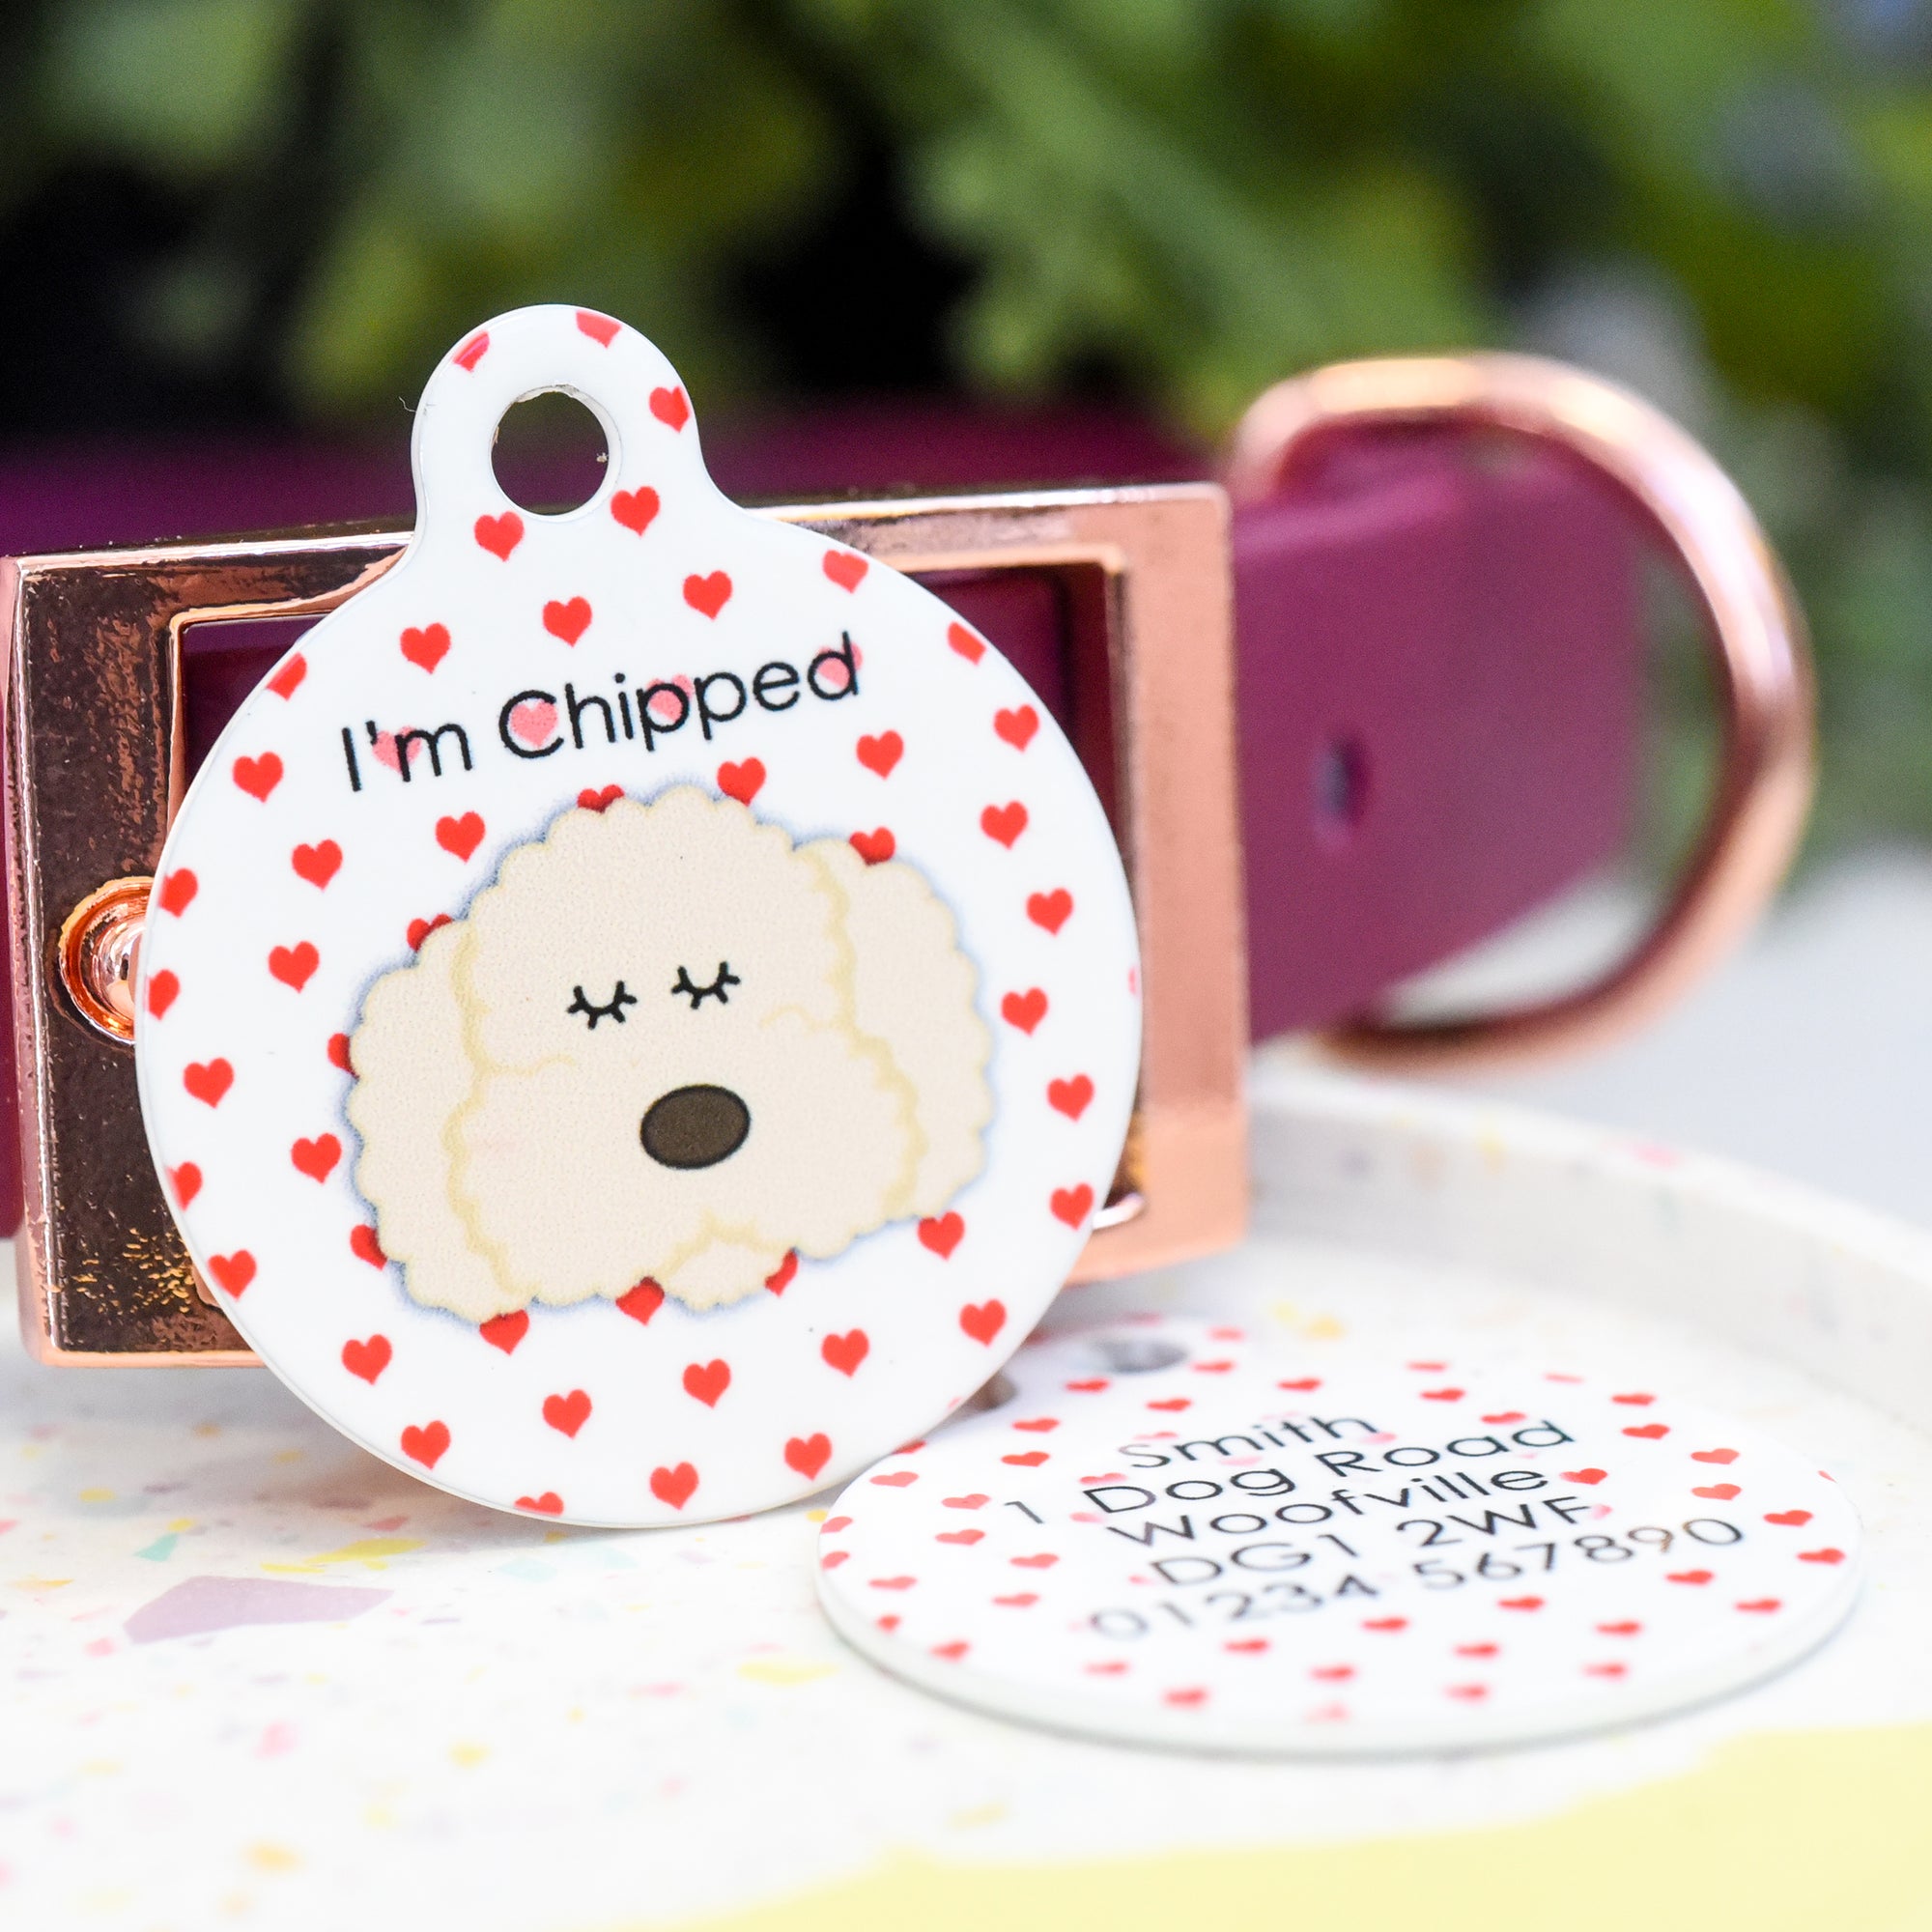 Cockapoo Personalised Dog Tag - Red Hearts